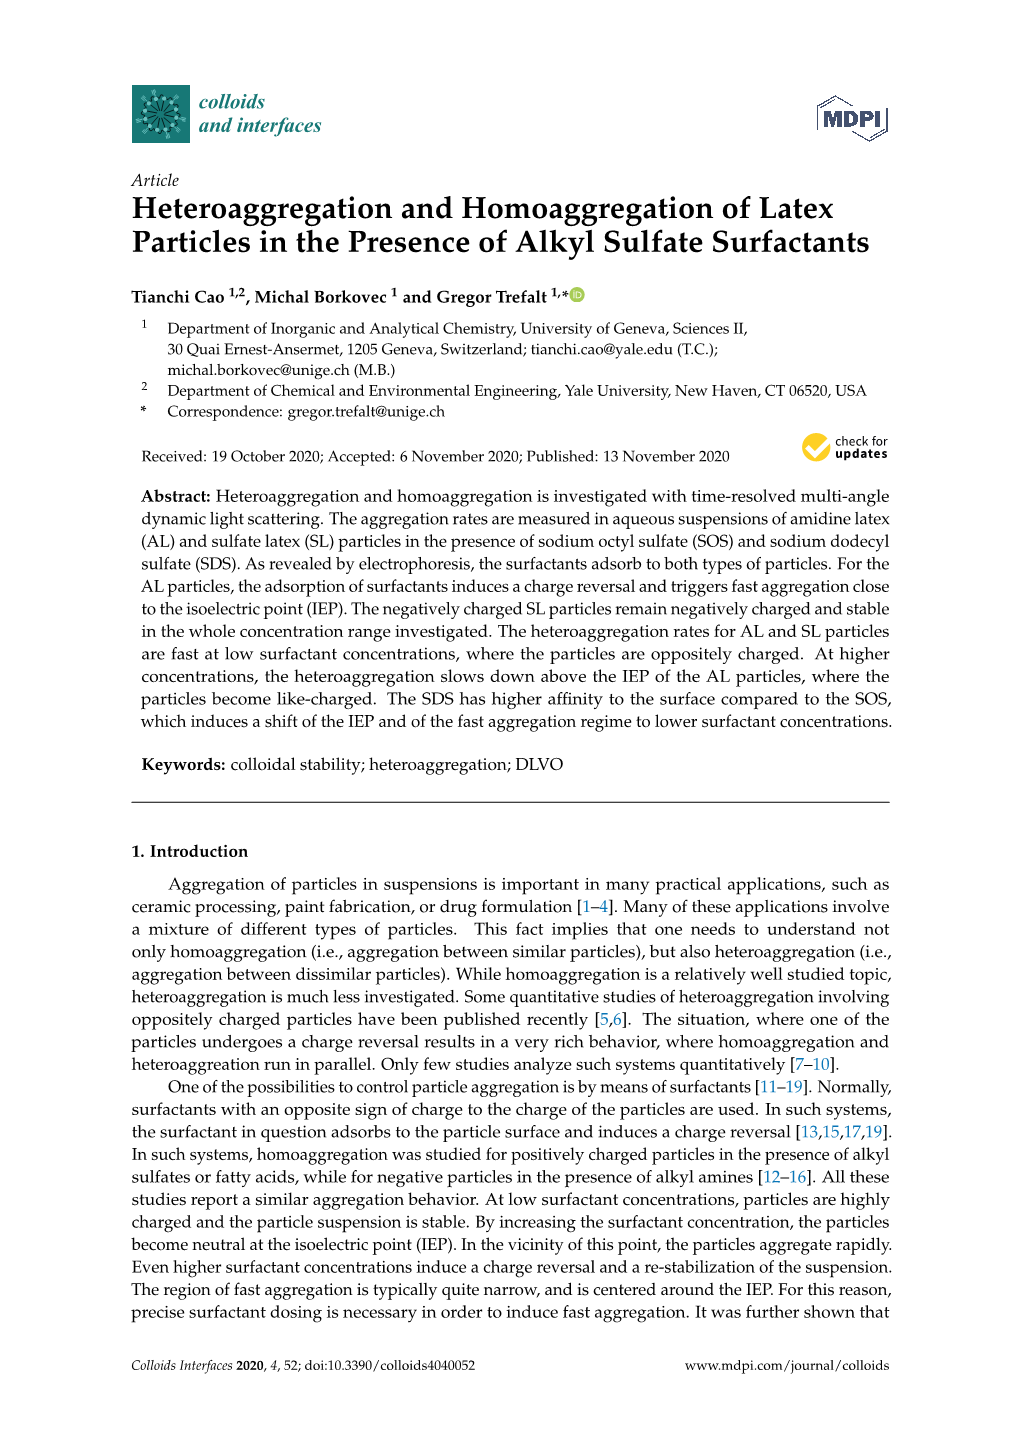 Heteroaggregation and Homoaggregation of Latex Particles in the Presence of Alkyl Sulfate Surfactants